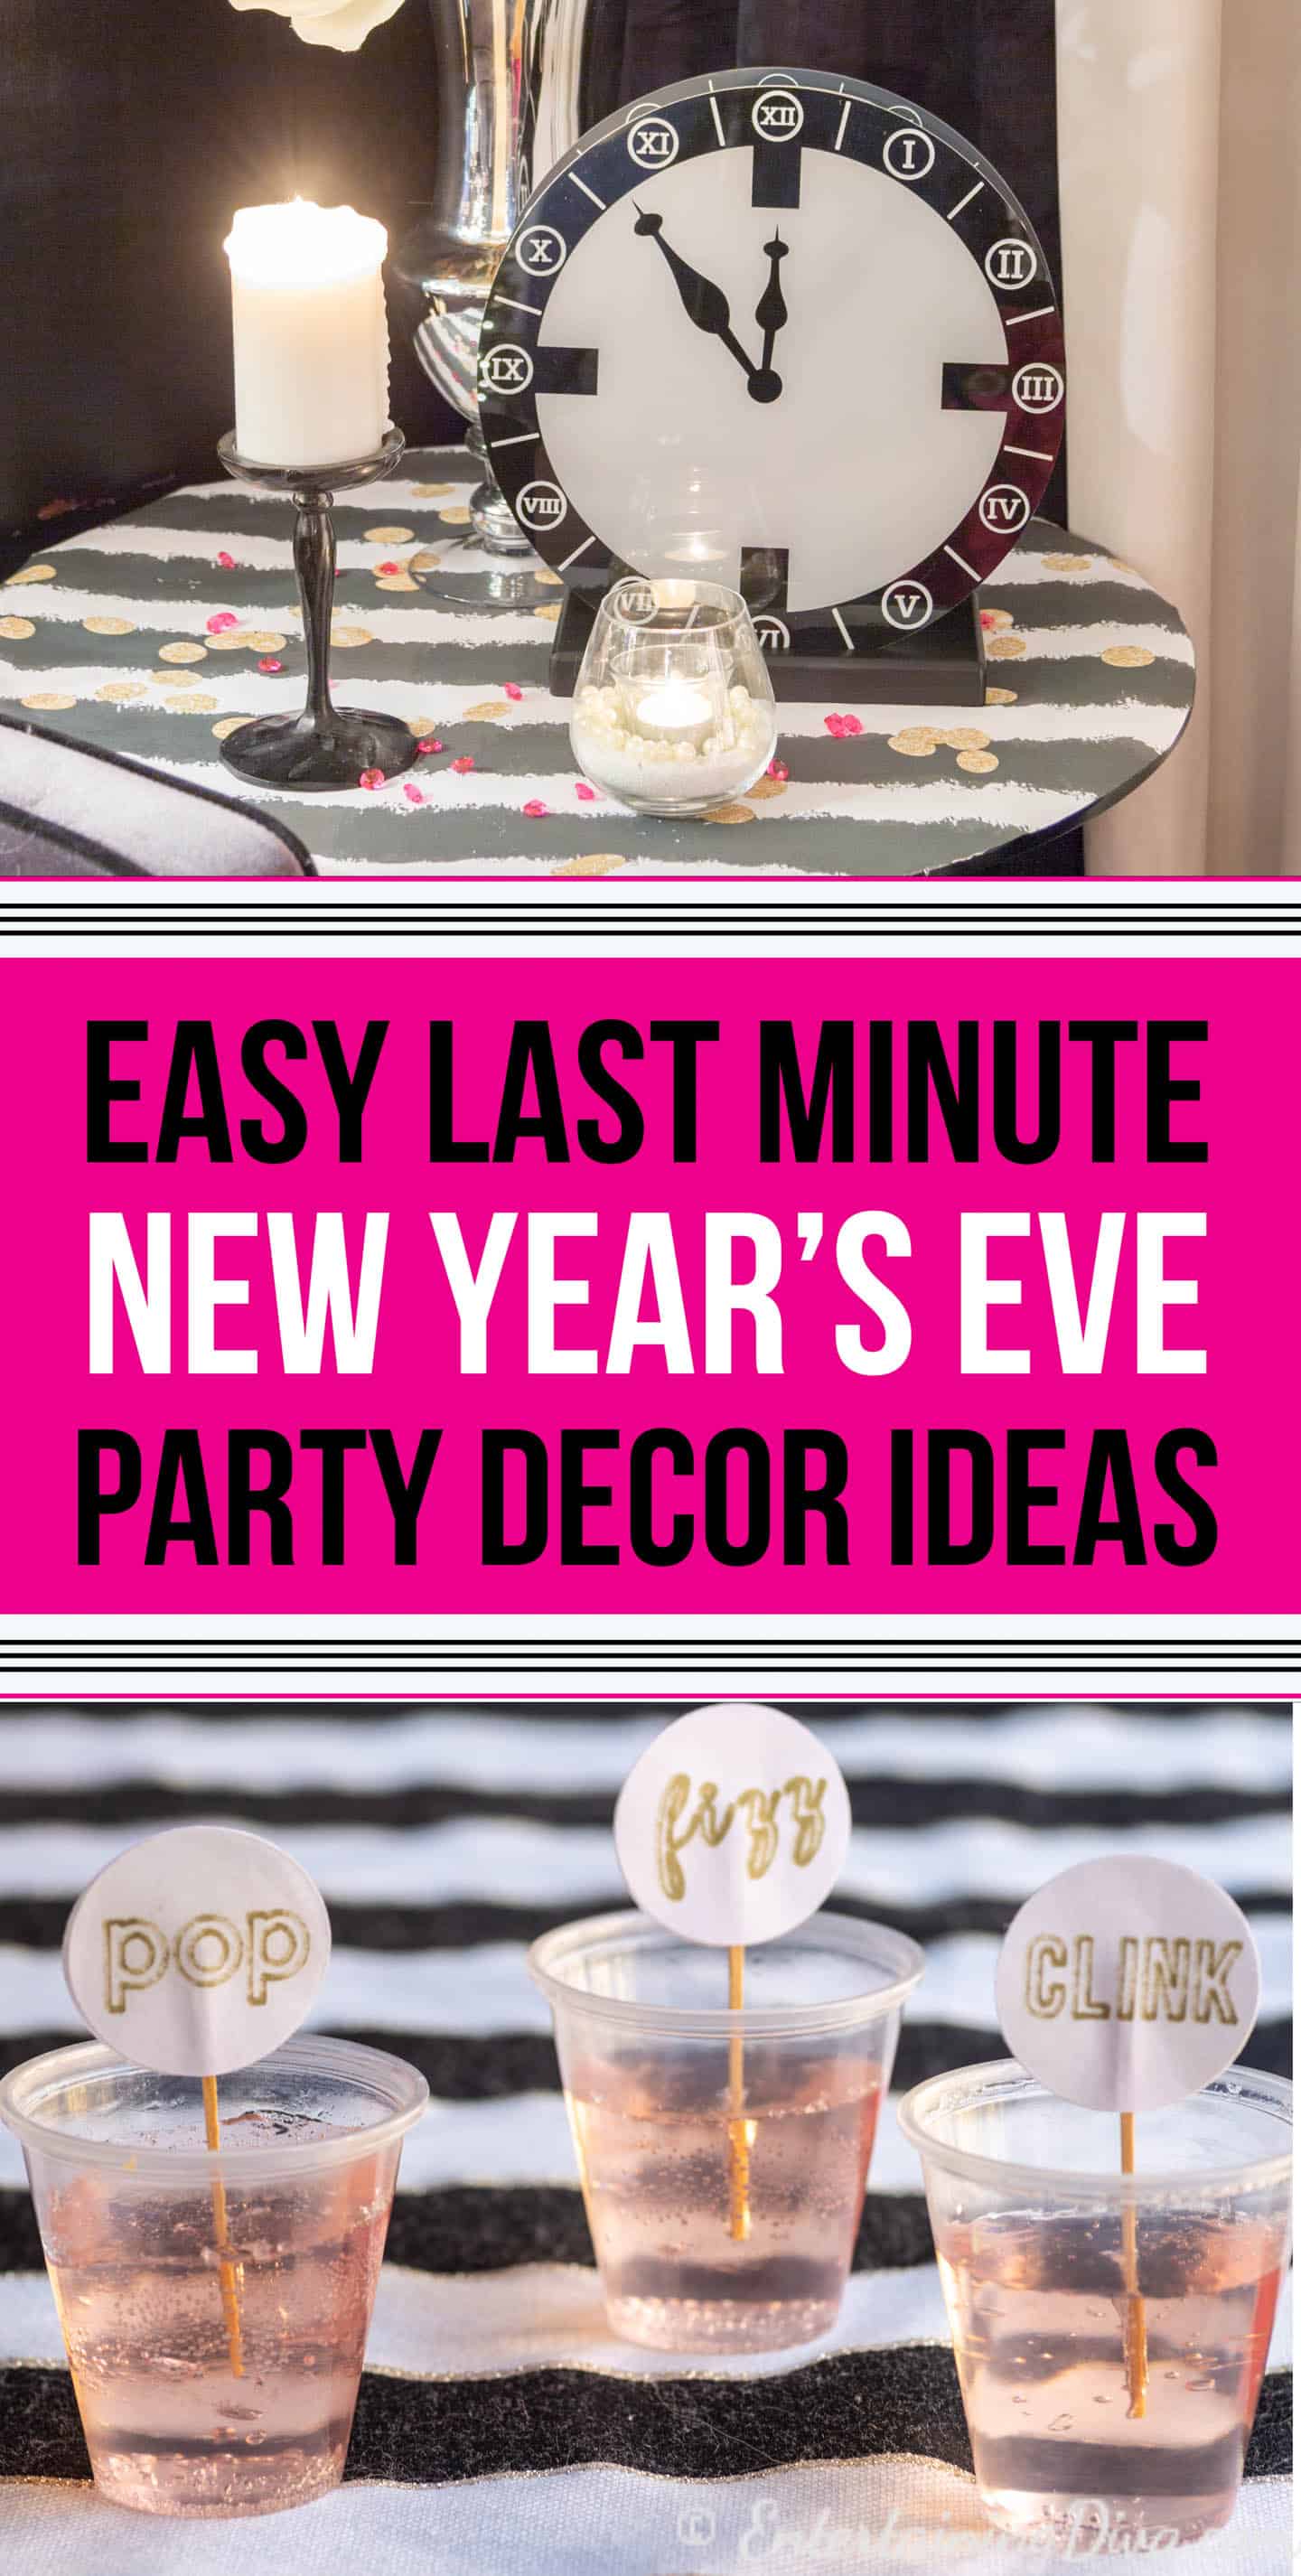 Last minute New Year's Eve party decorations ideas